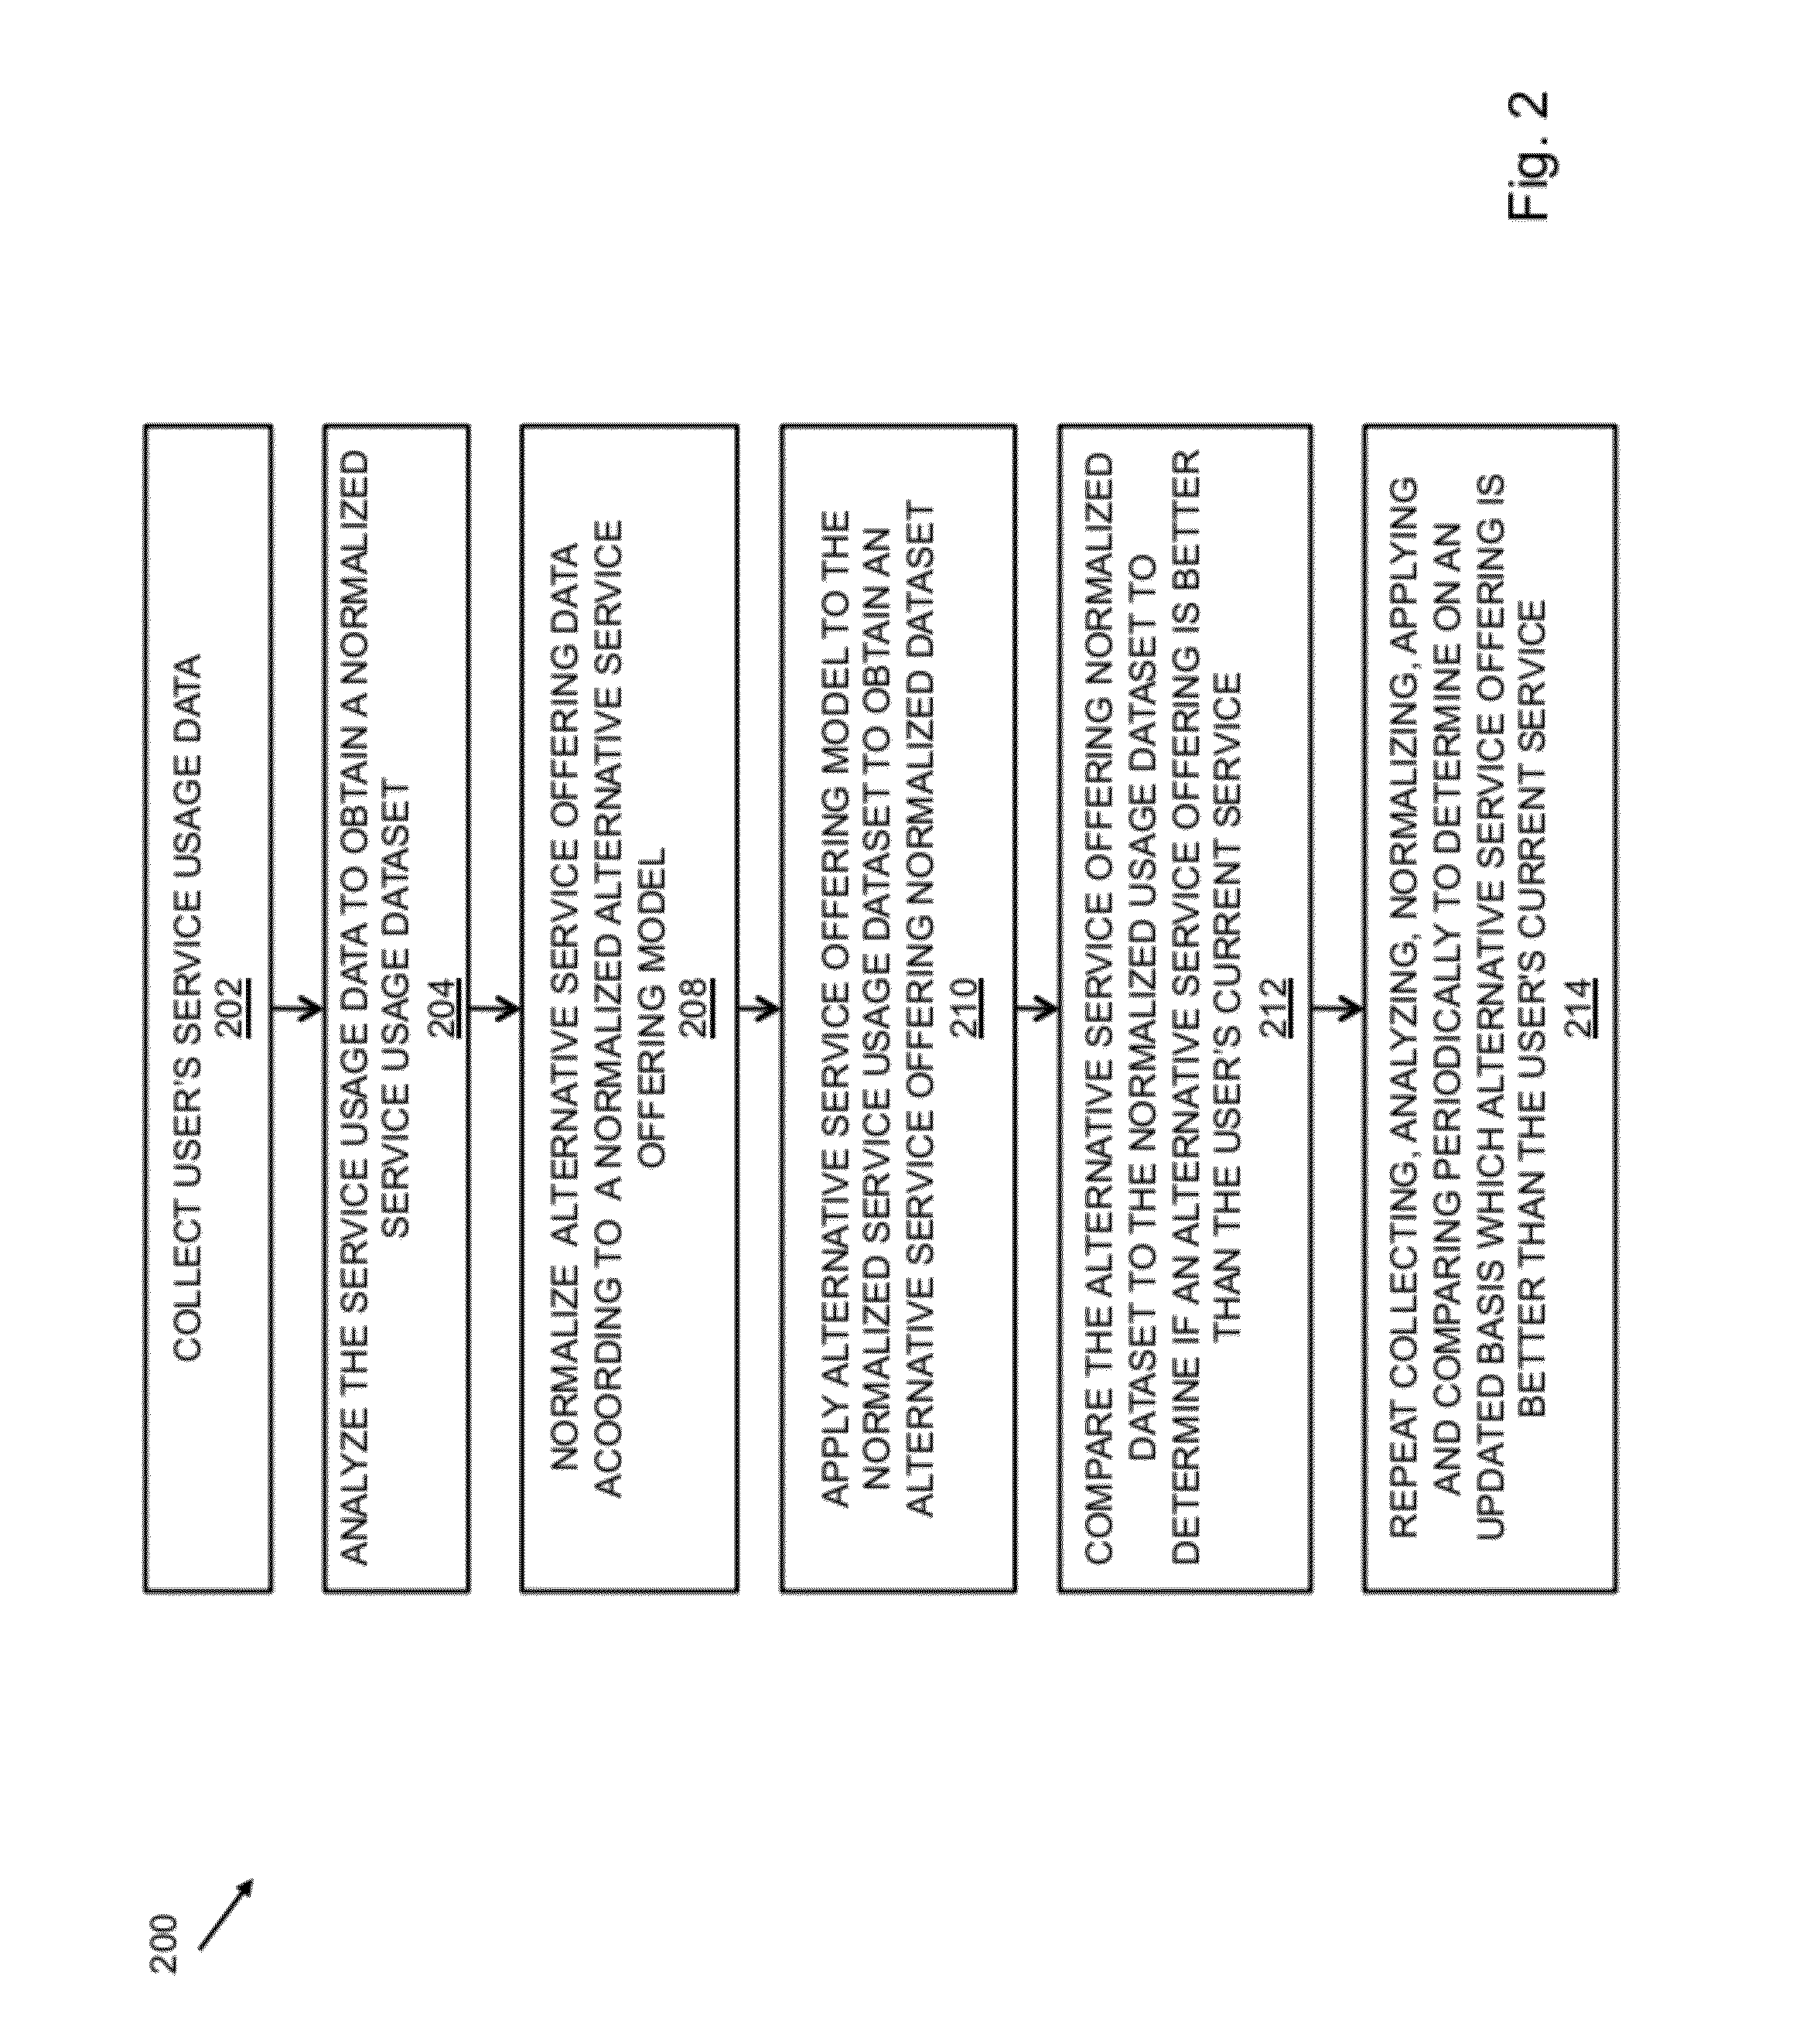 System and method for providing a savings opportunity in association with a financial account